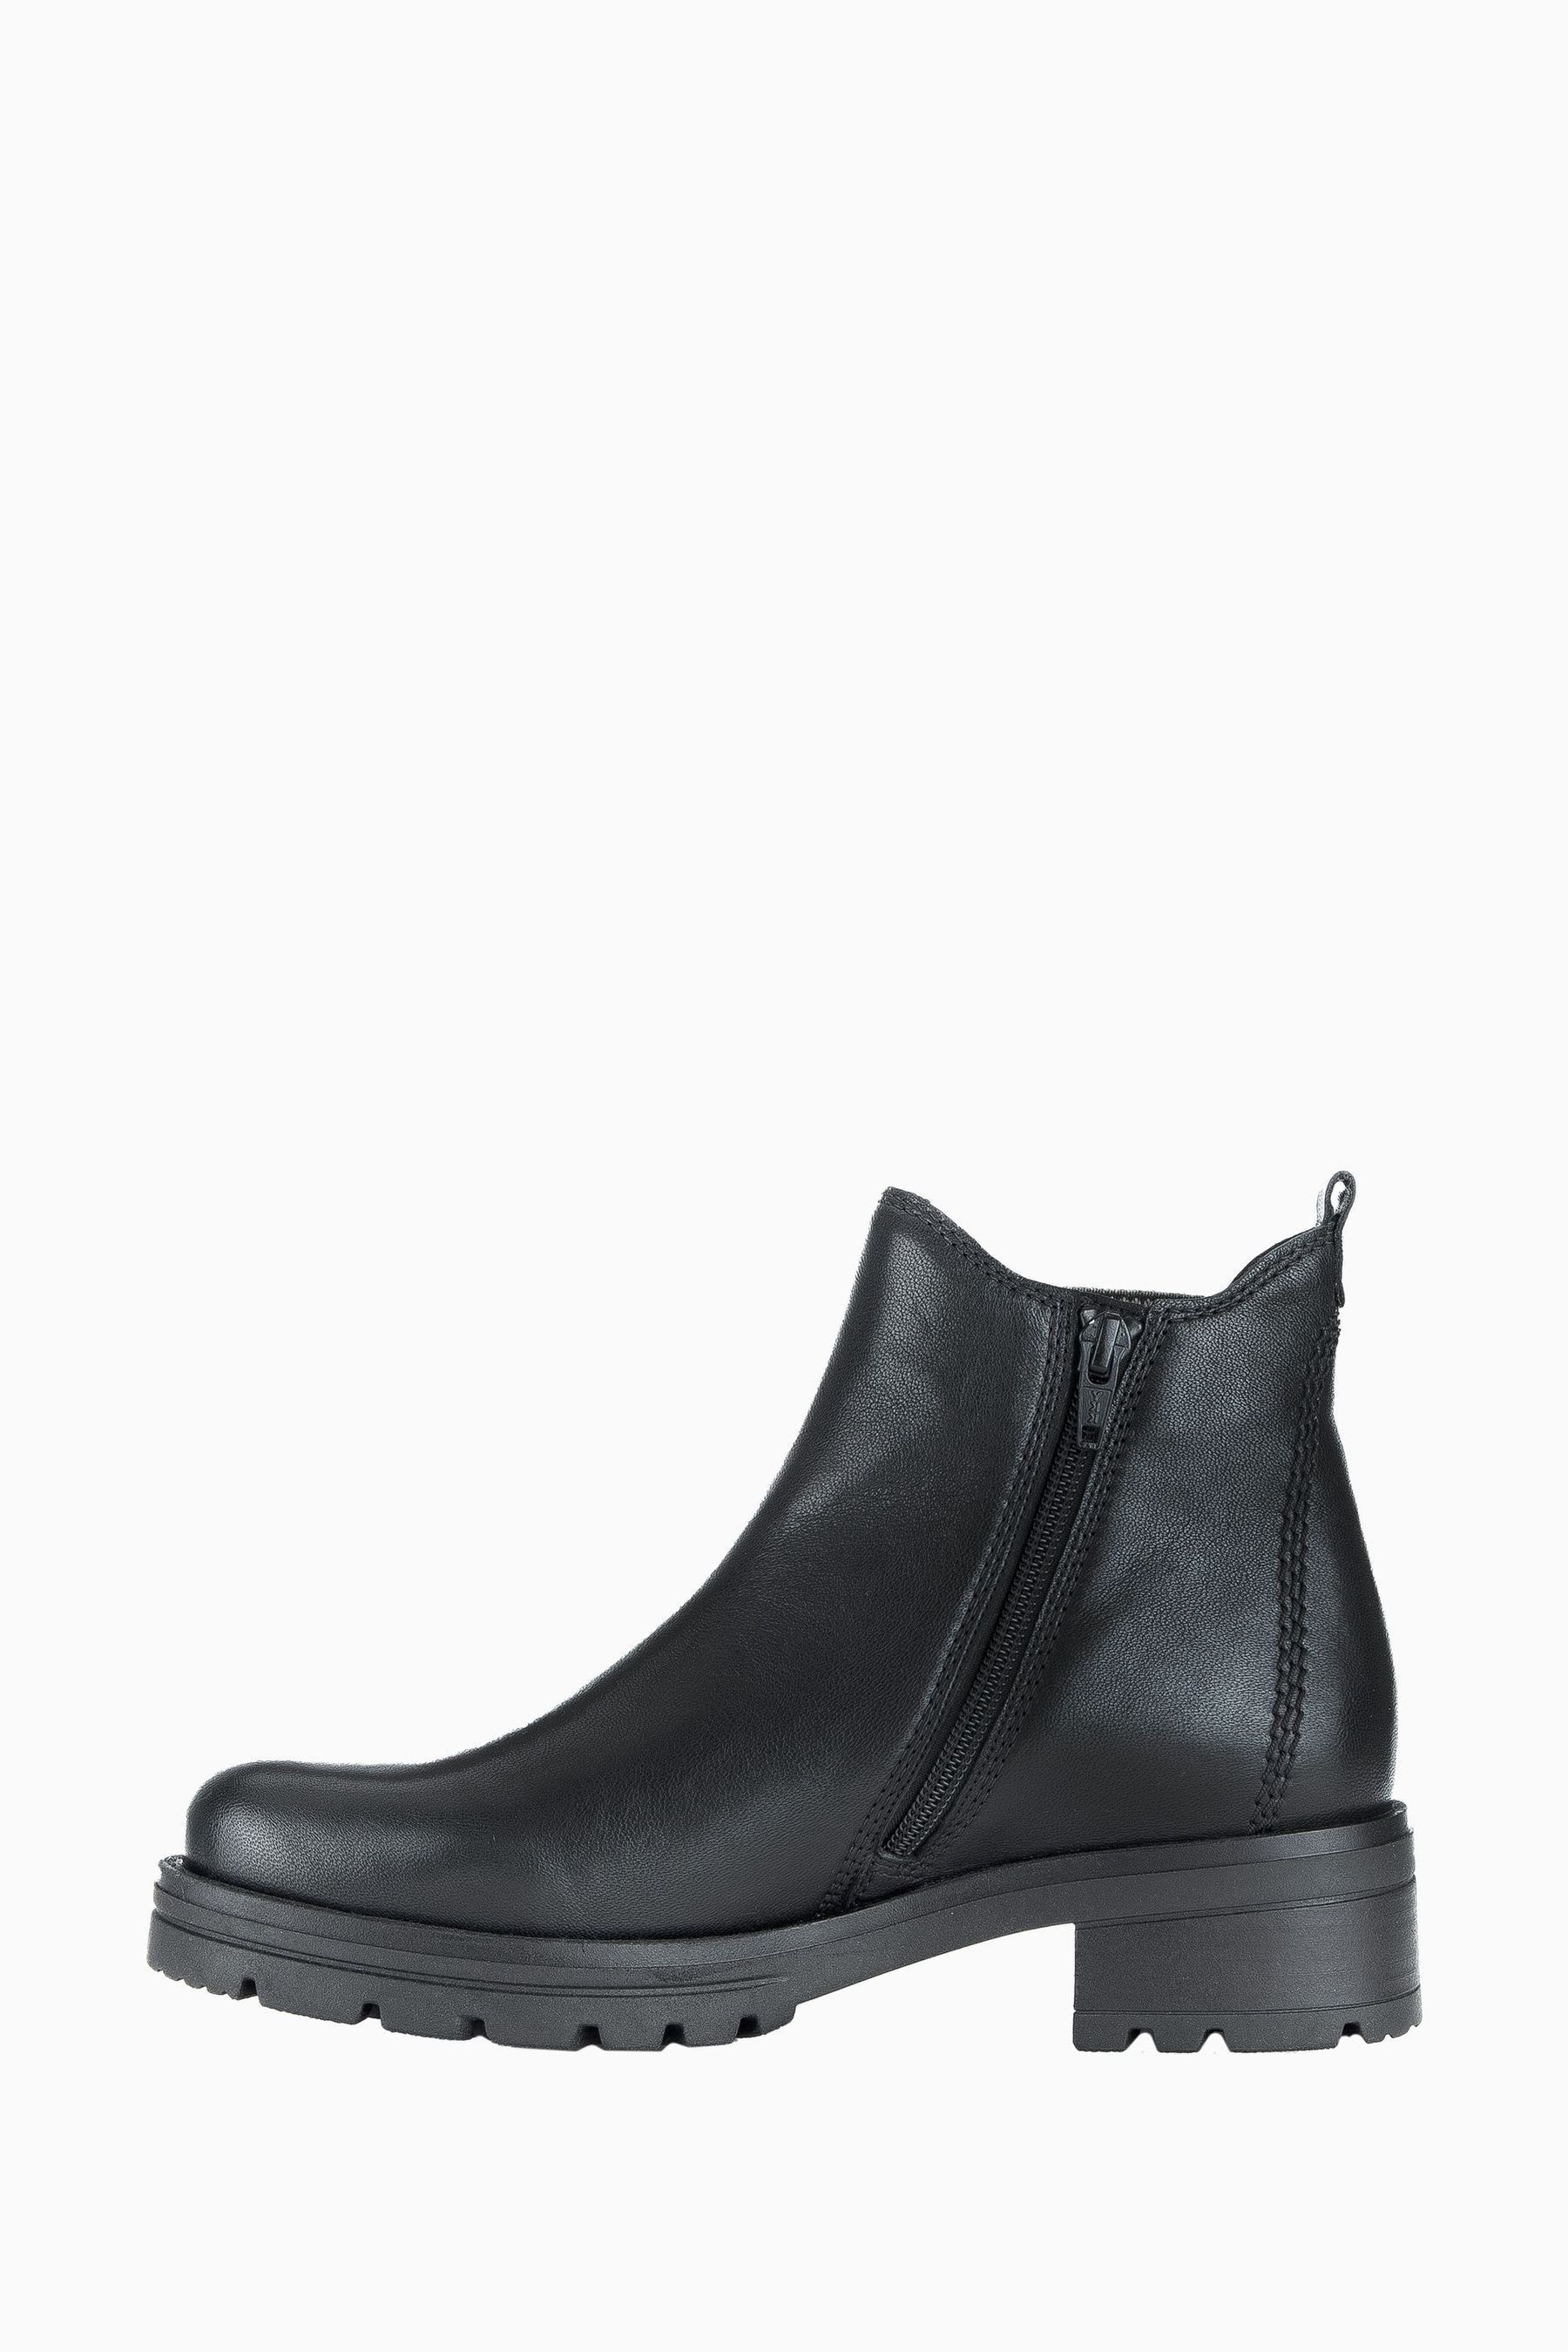 Buy Gabor Sallis Black Leather Ankle Boots from the Next UK online shop